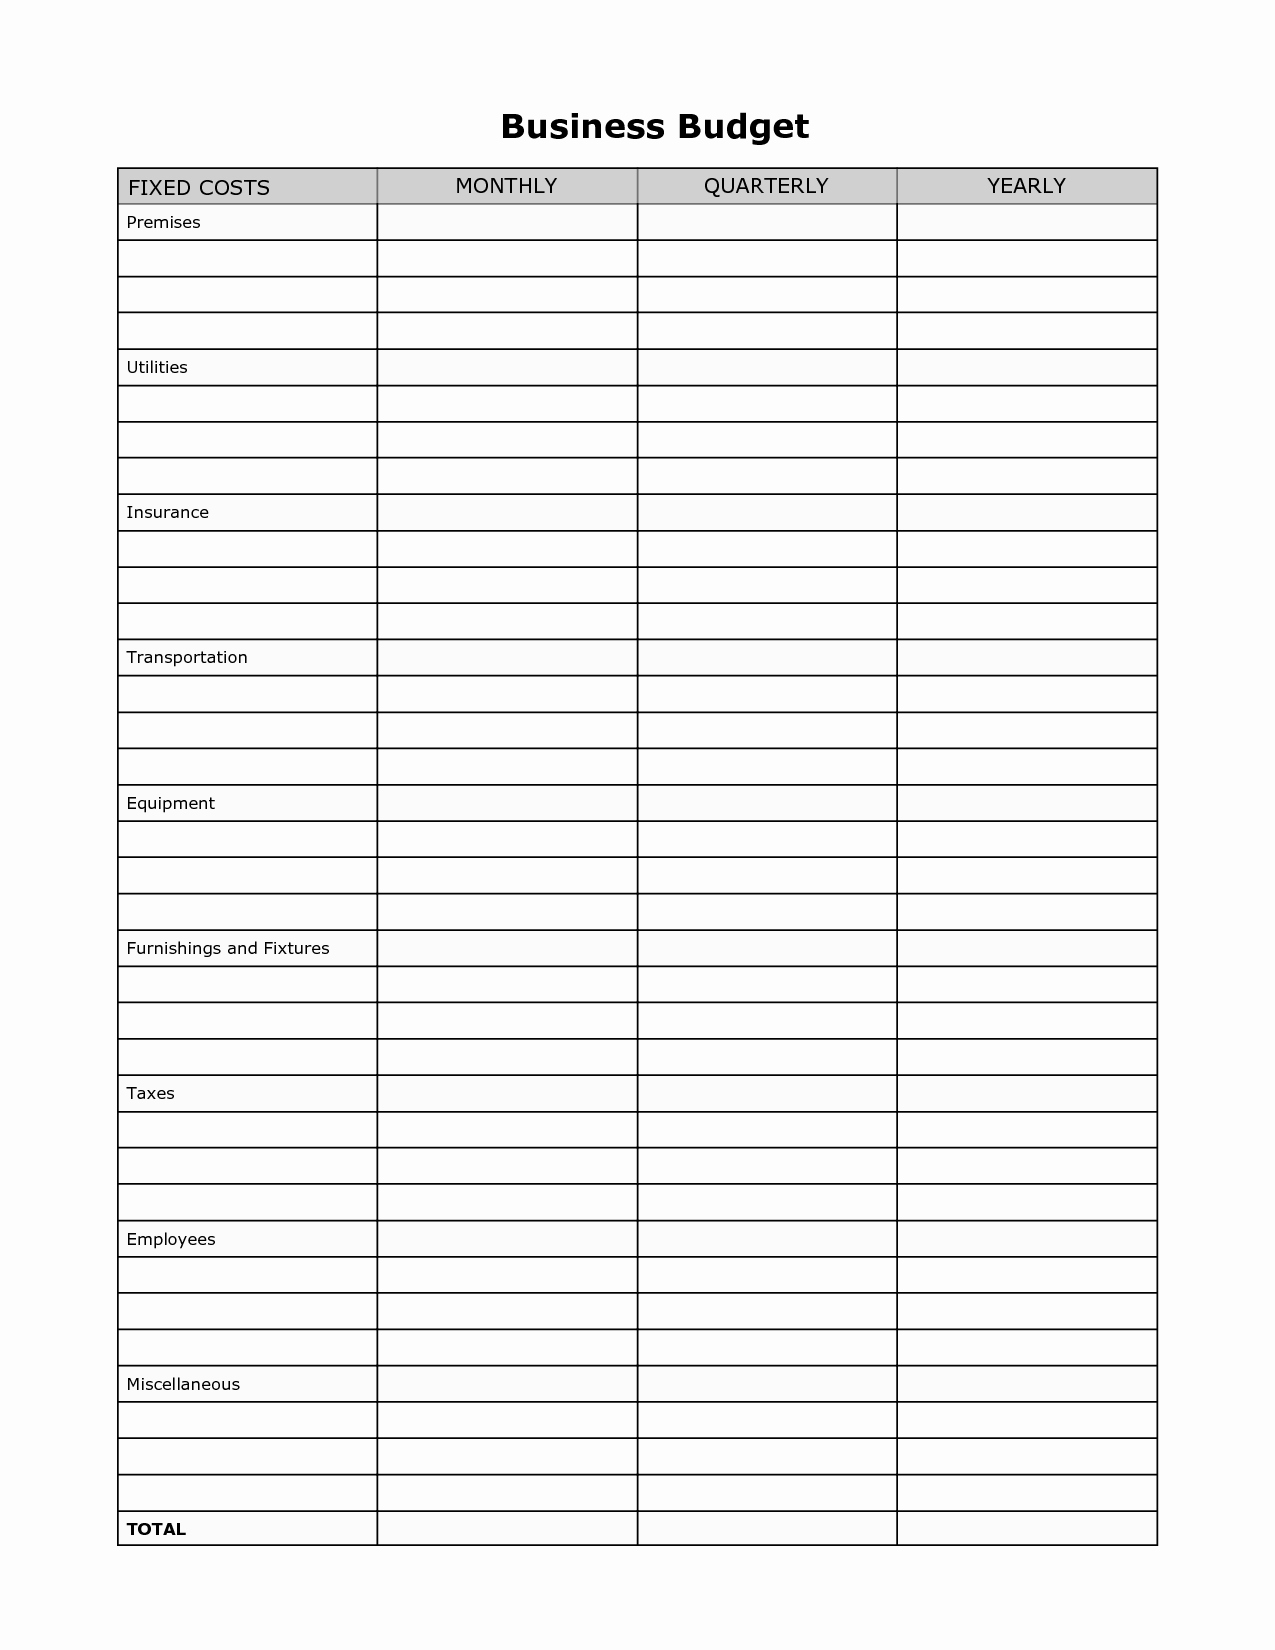 Business Monthly Budget Template New Monthly Expense Worksheet Template Business Reference